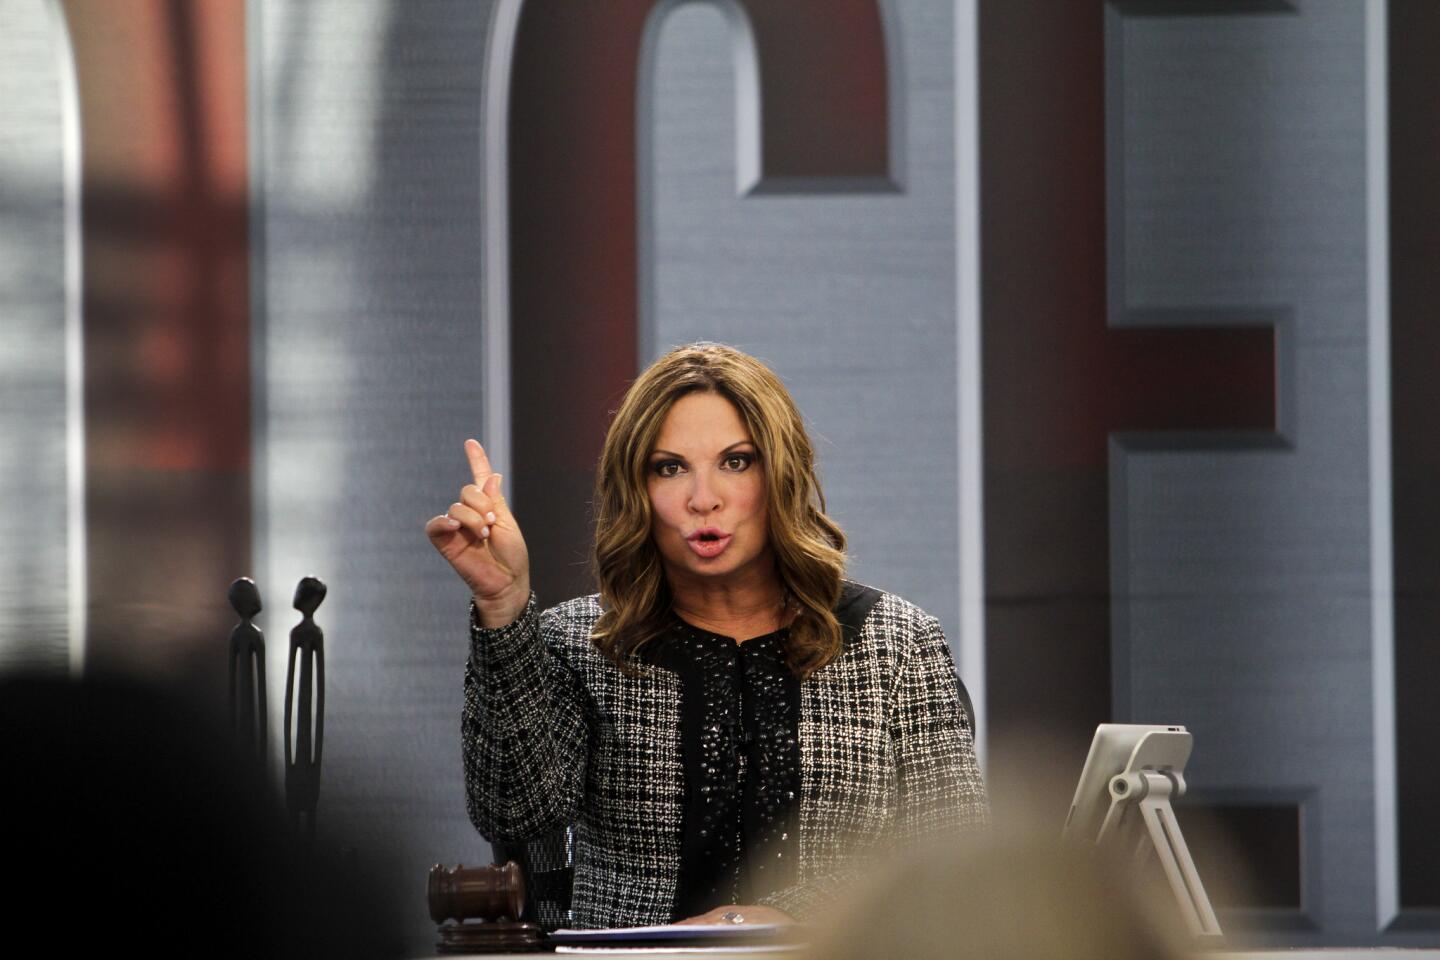 The TV judge of Telemundo's "Caso Cerrado" brings her own style to the court show format, even singing the program's theme song.